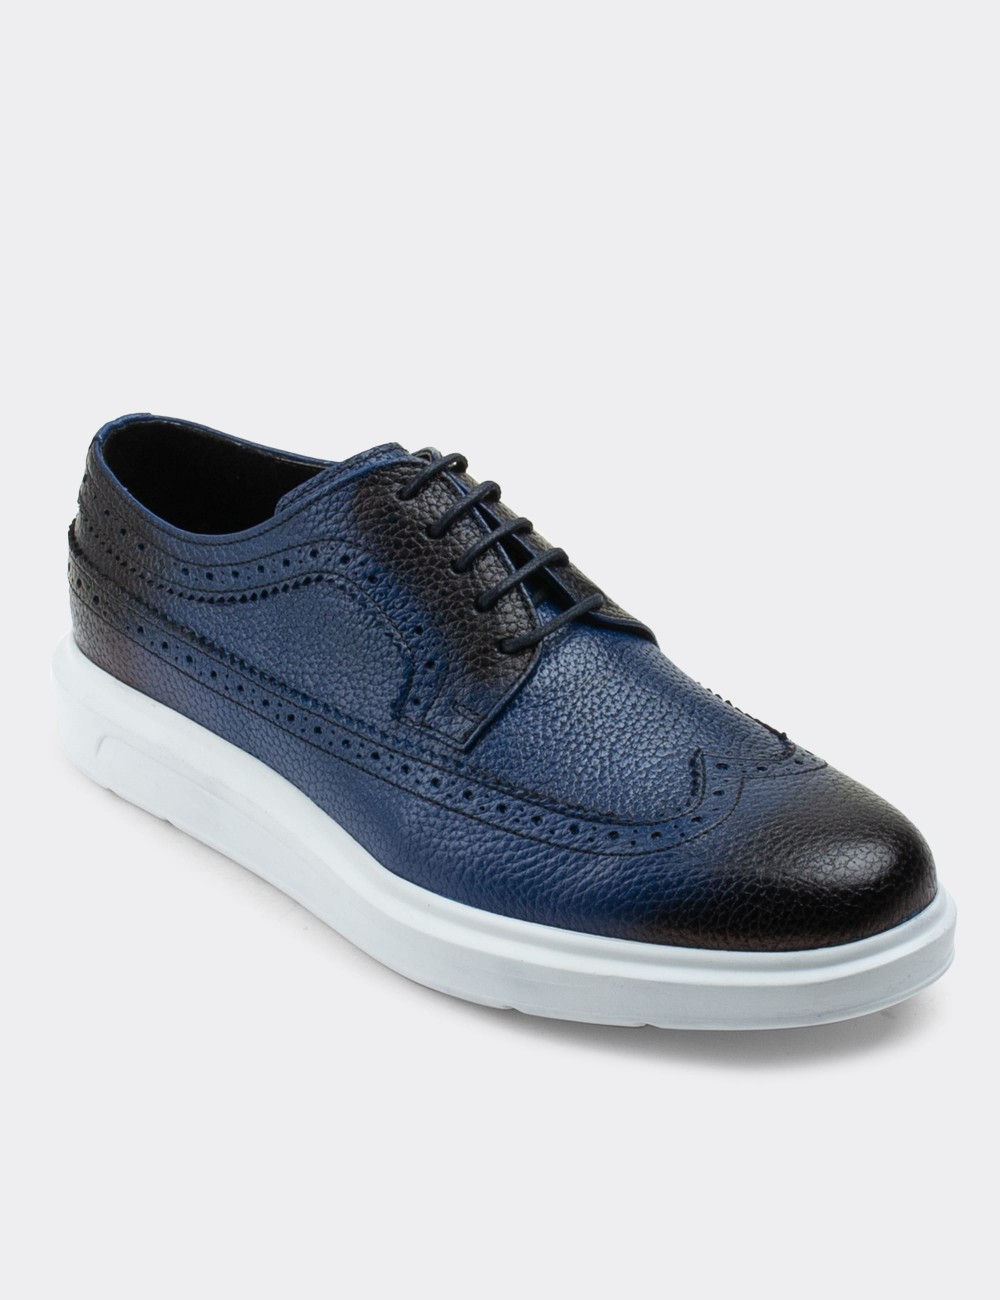 Blue  Leather Lace-up Shoes - 01293MMVIP08